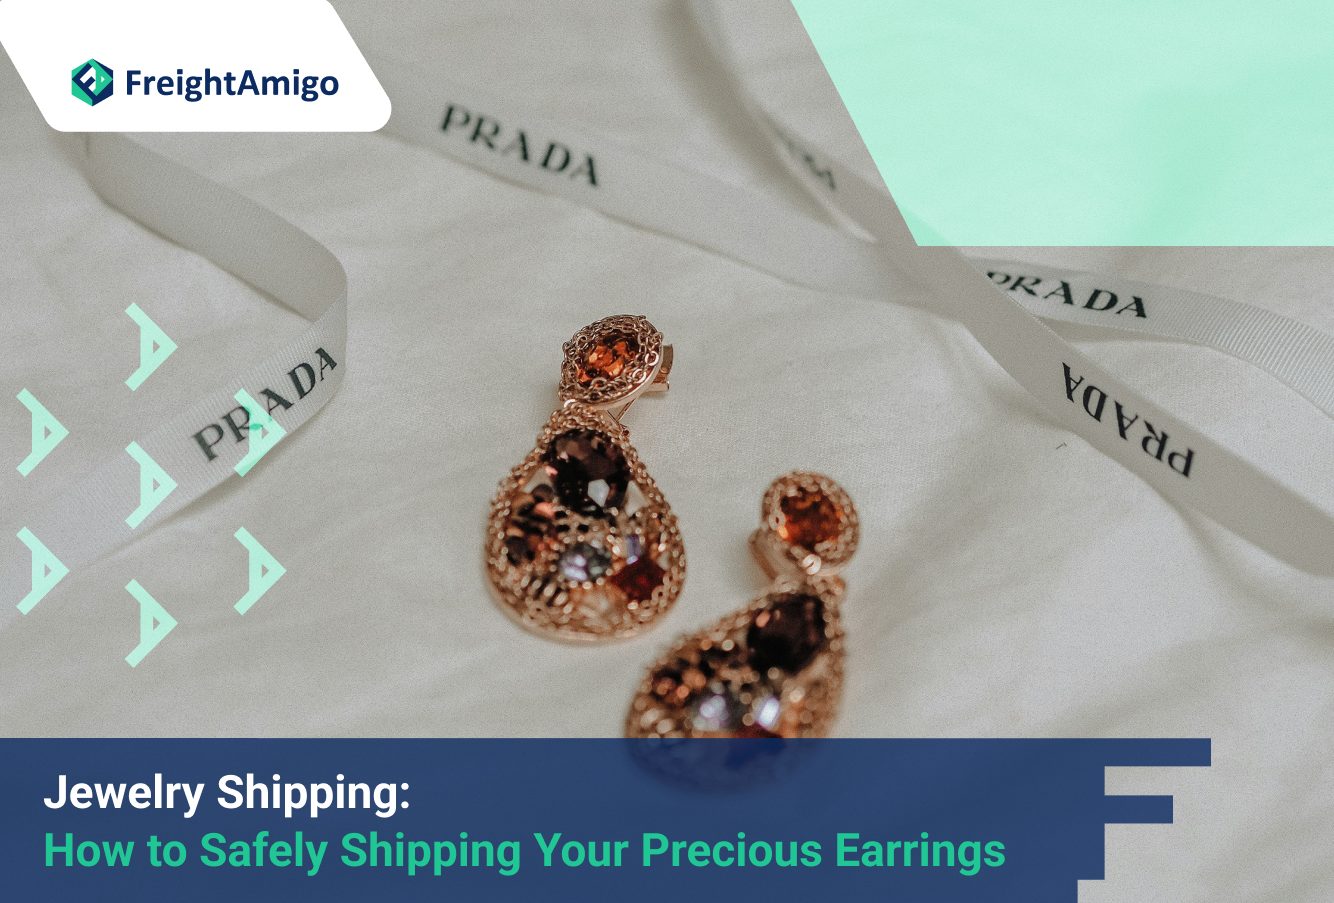 Jewelry Shipping: A Comprehensive Guide for Safely Shipping Your Precious Earrings